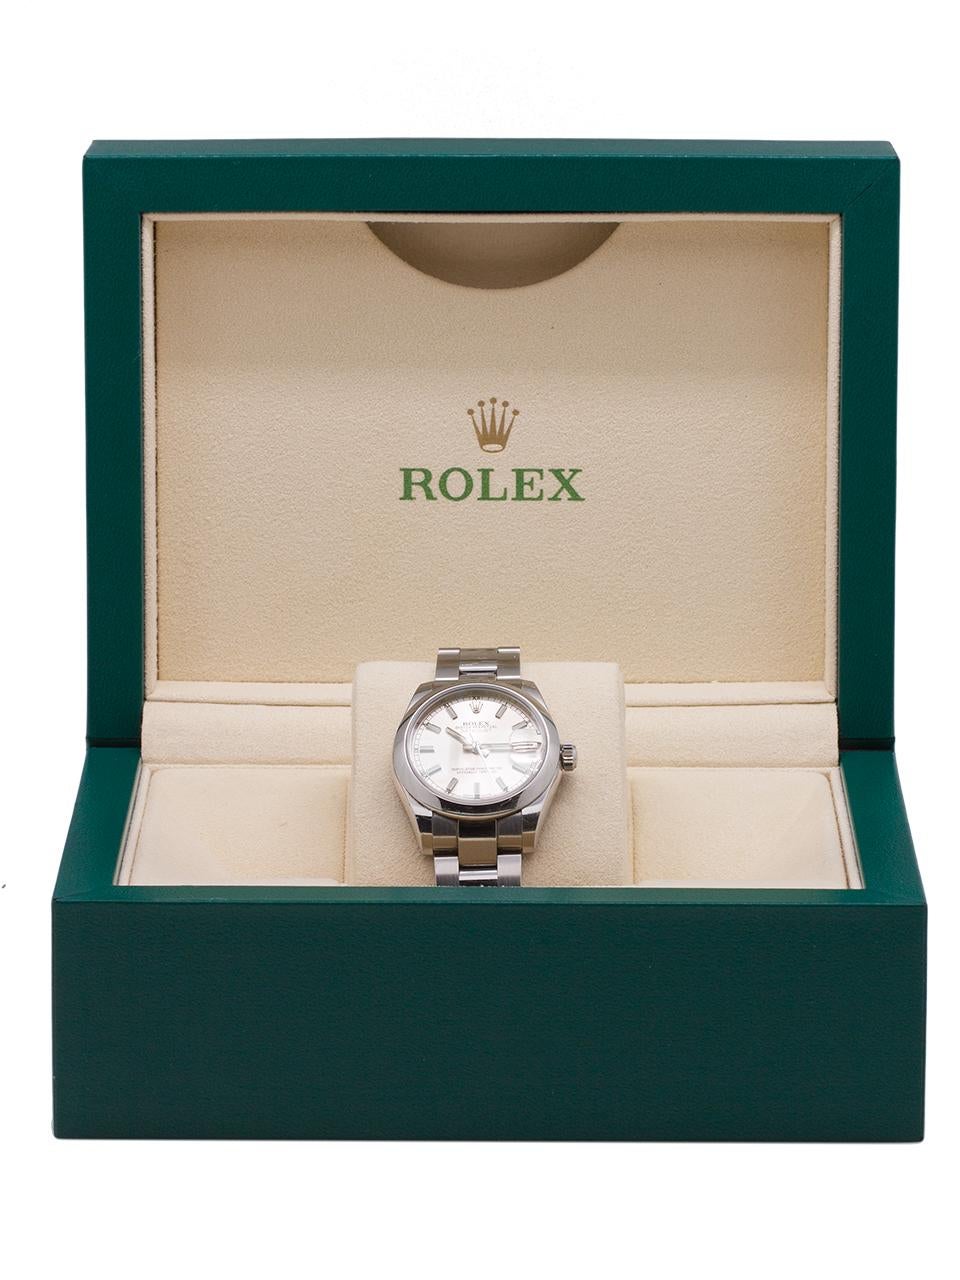 Lady Rolex Datejust Stainless Steel Ref 178240 circa 2015 Box and Papers For Sale 2